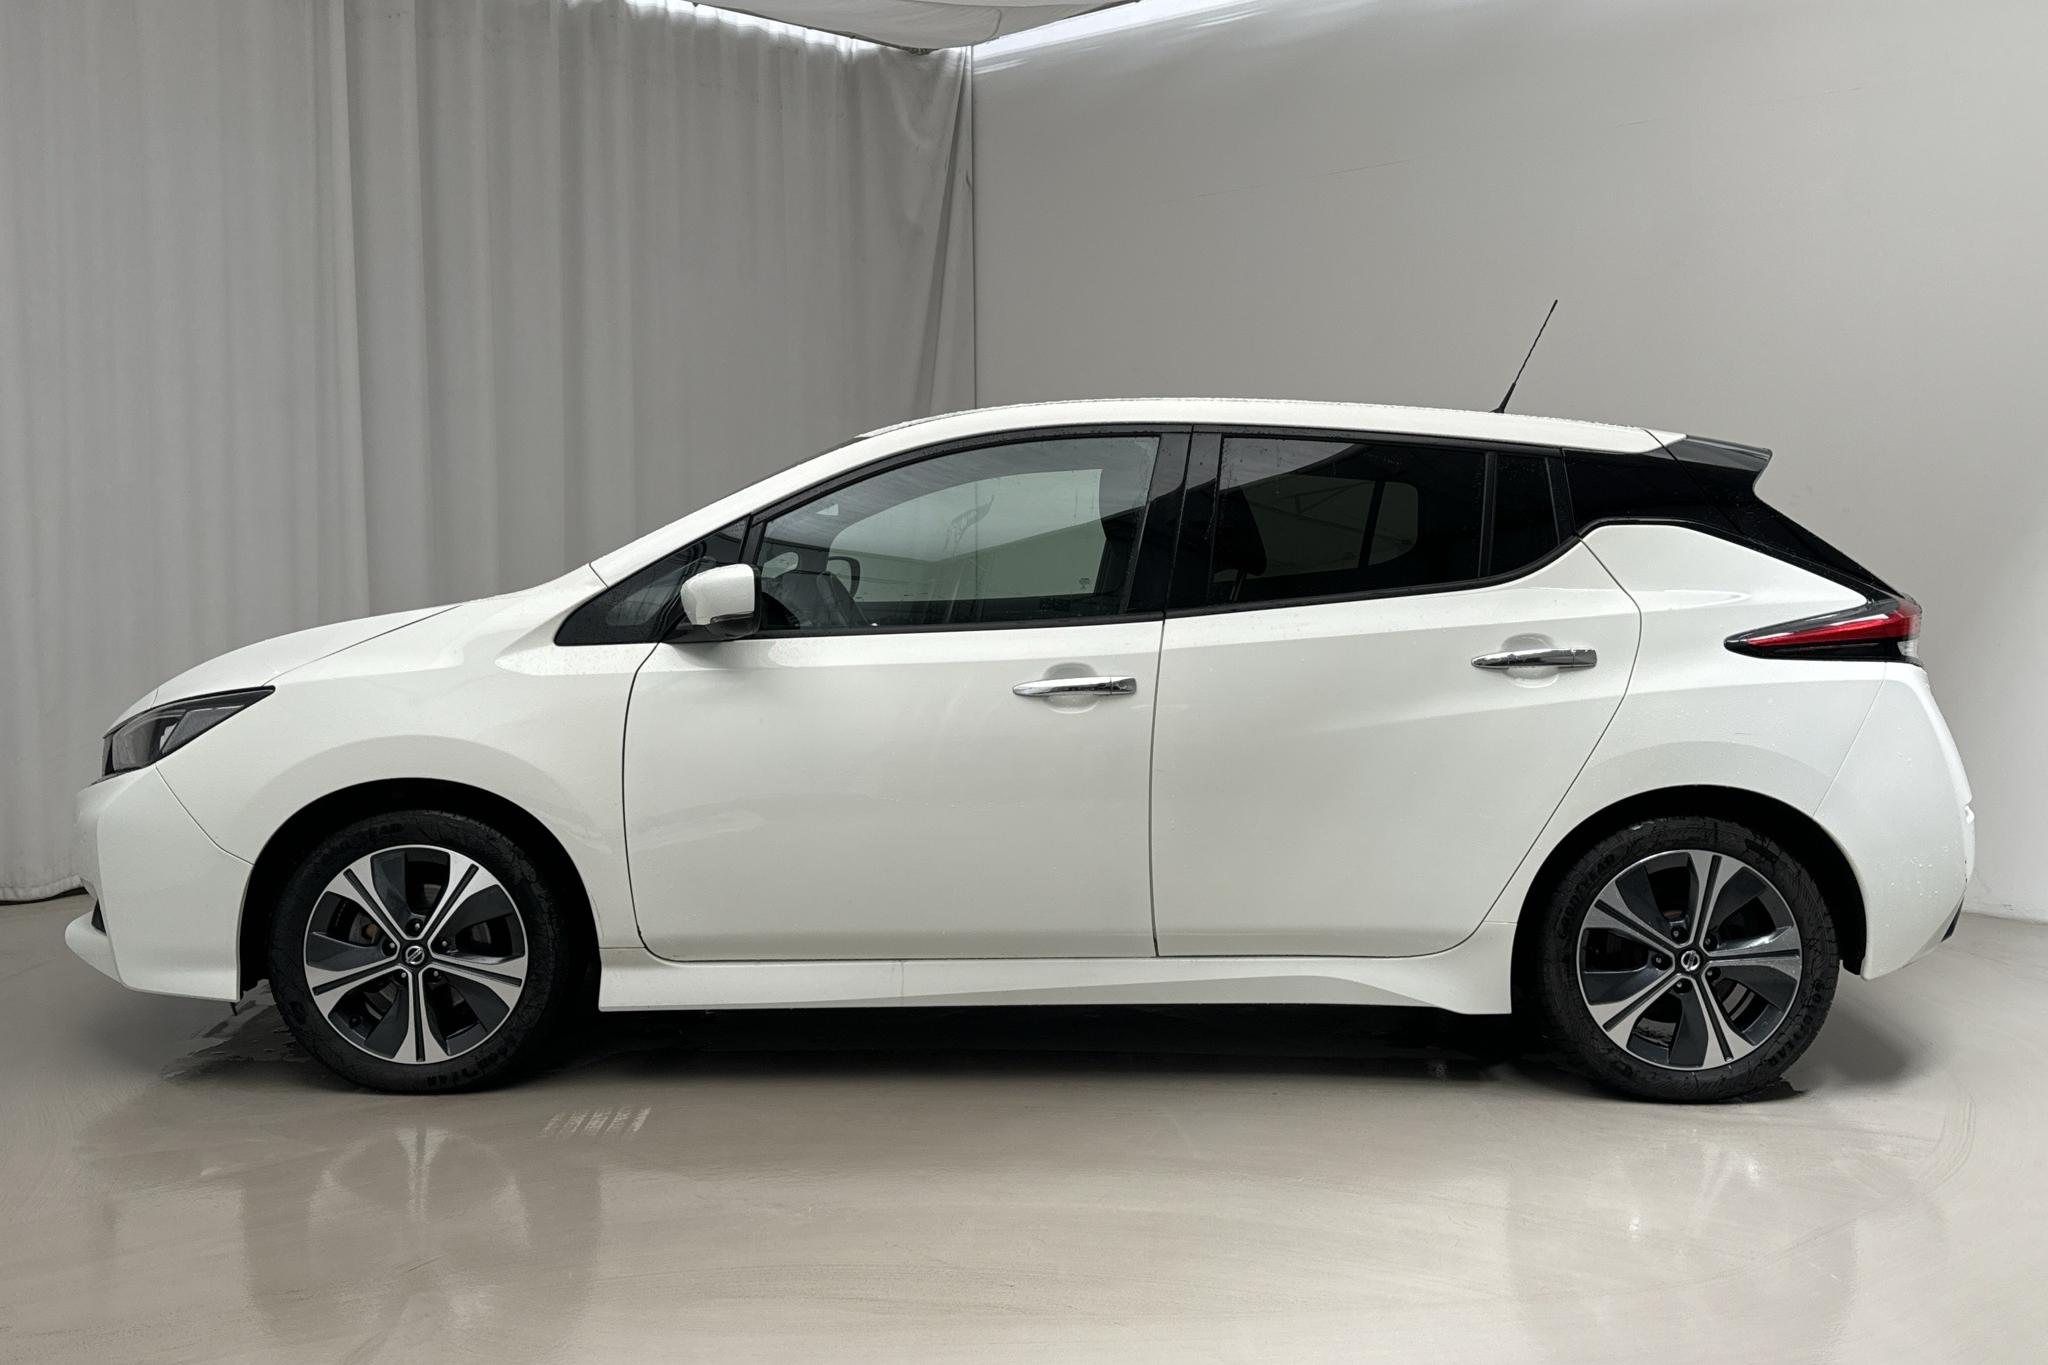 Nissan LEAF 5dr 40 kWh (150hk) - 32 830 km - Automatic - white - 2021